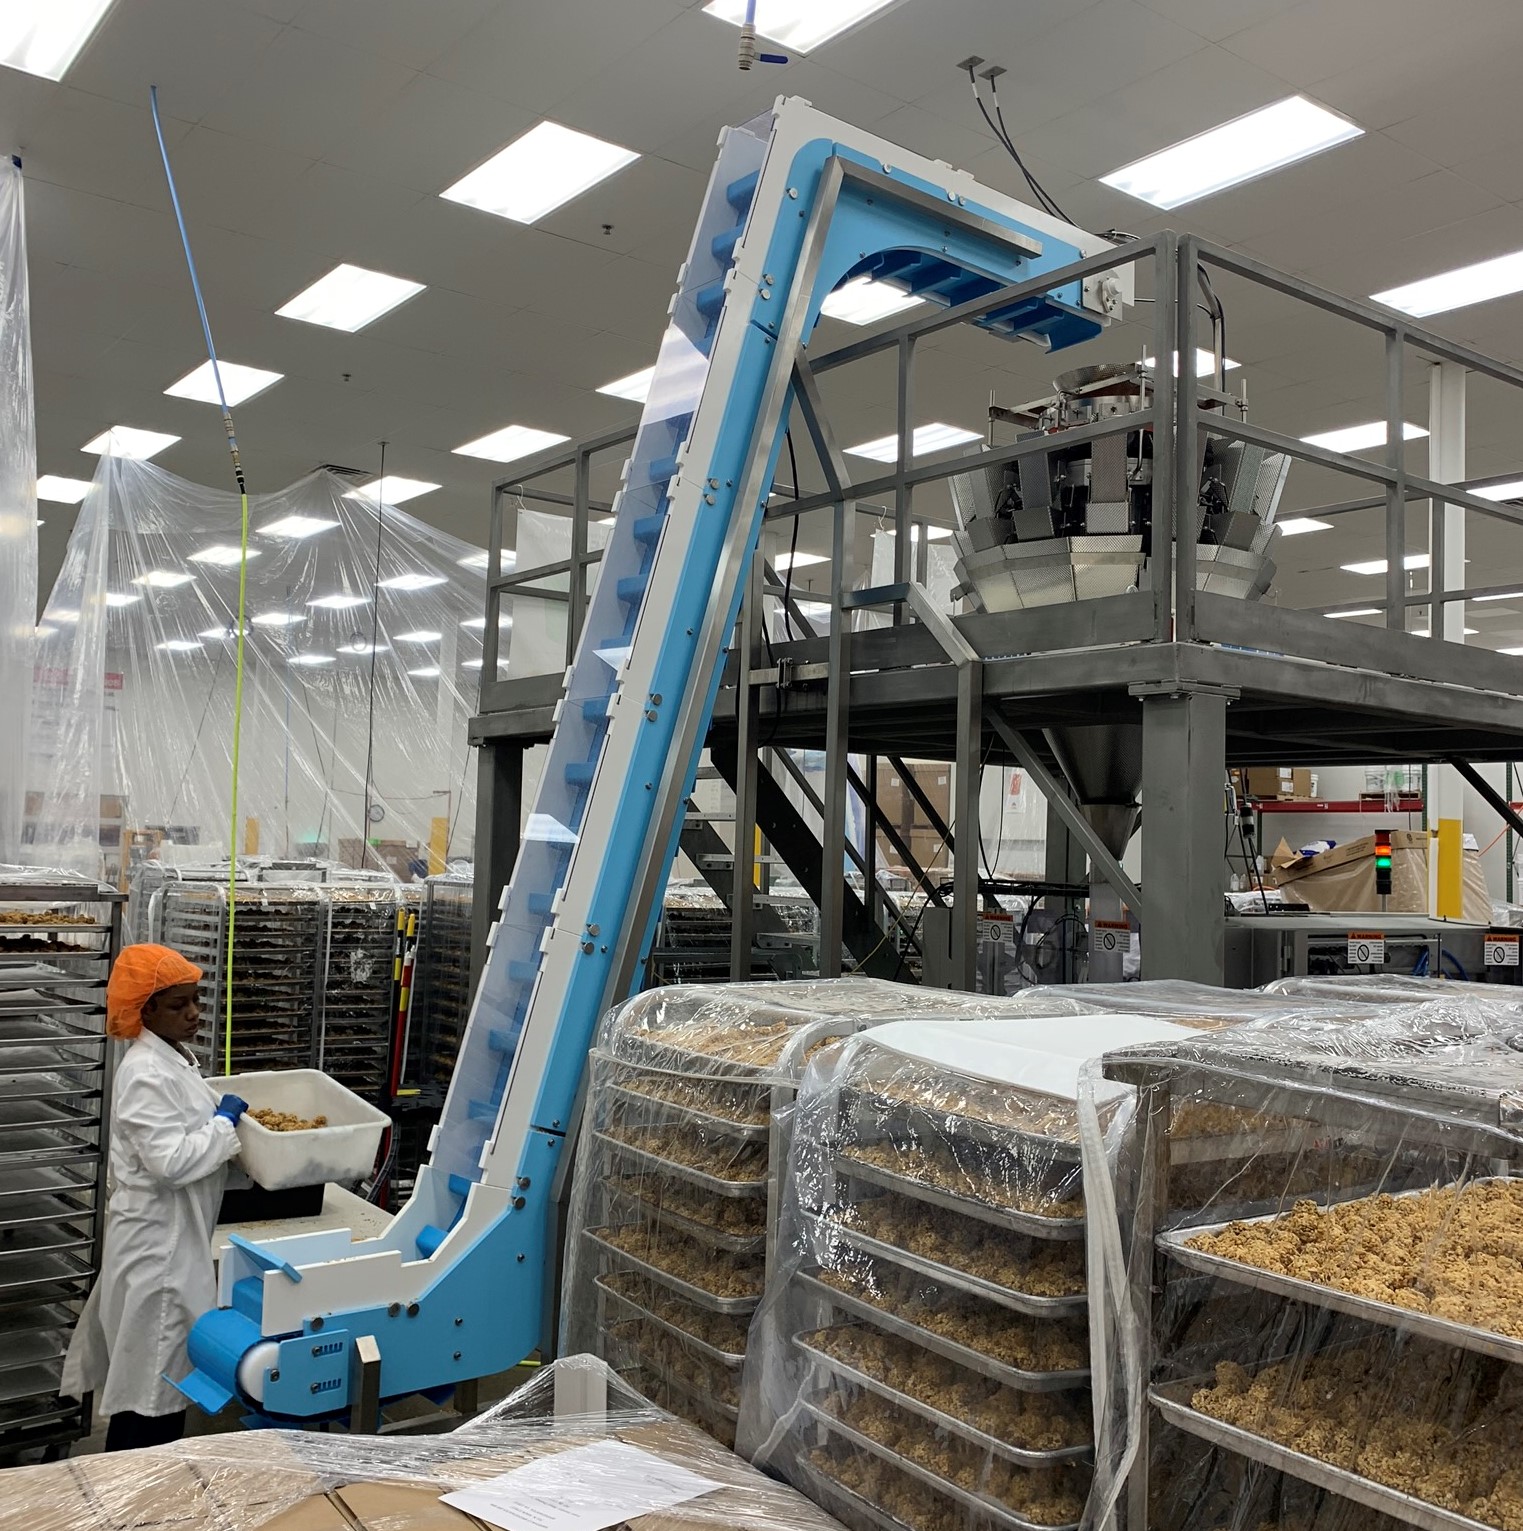 Two Gluten-Free Brothers Increase Productivity with Two Easy-to-Clean Conveyors